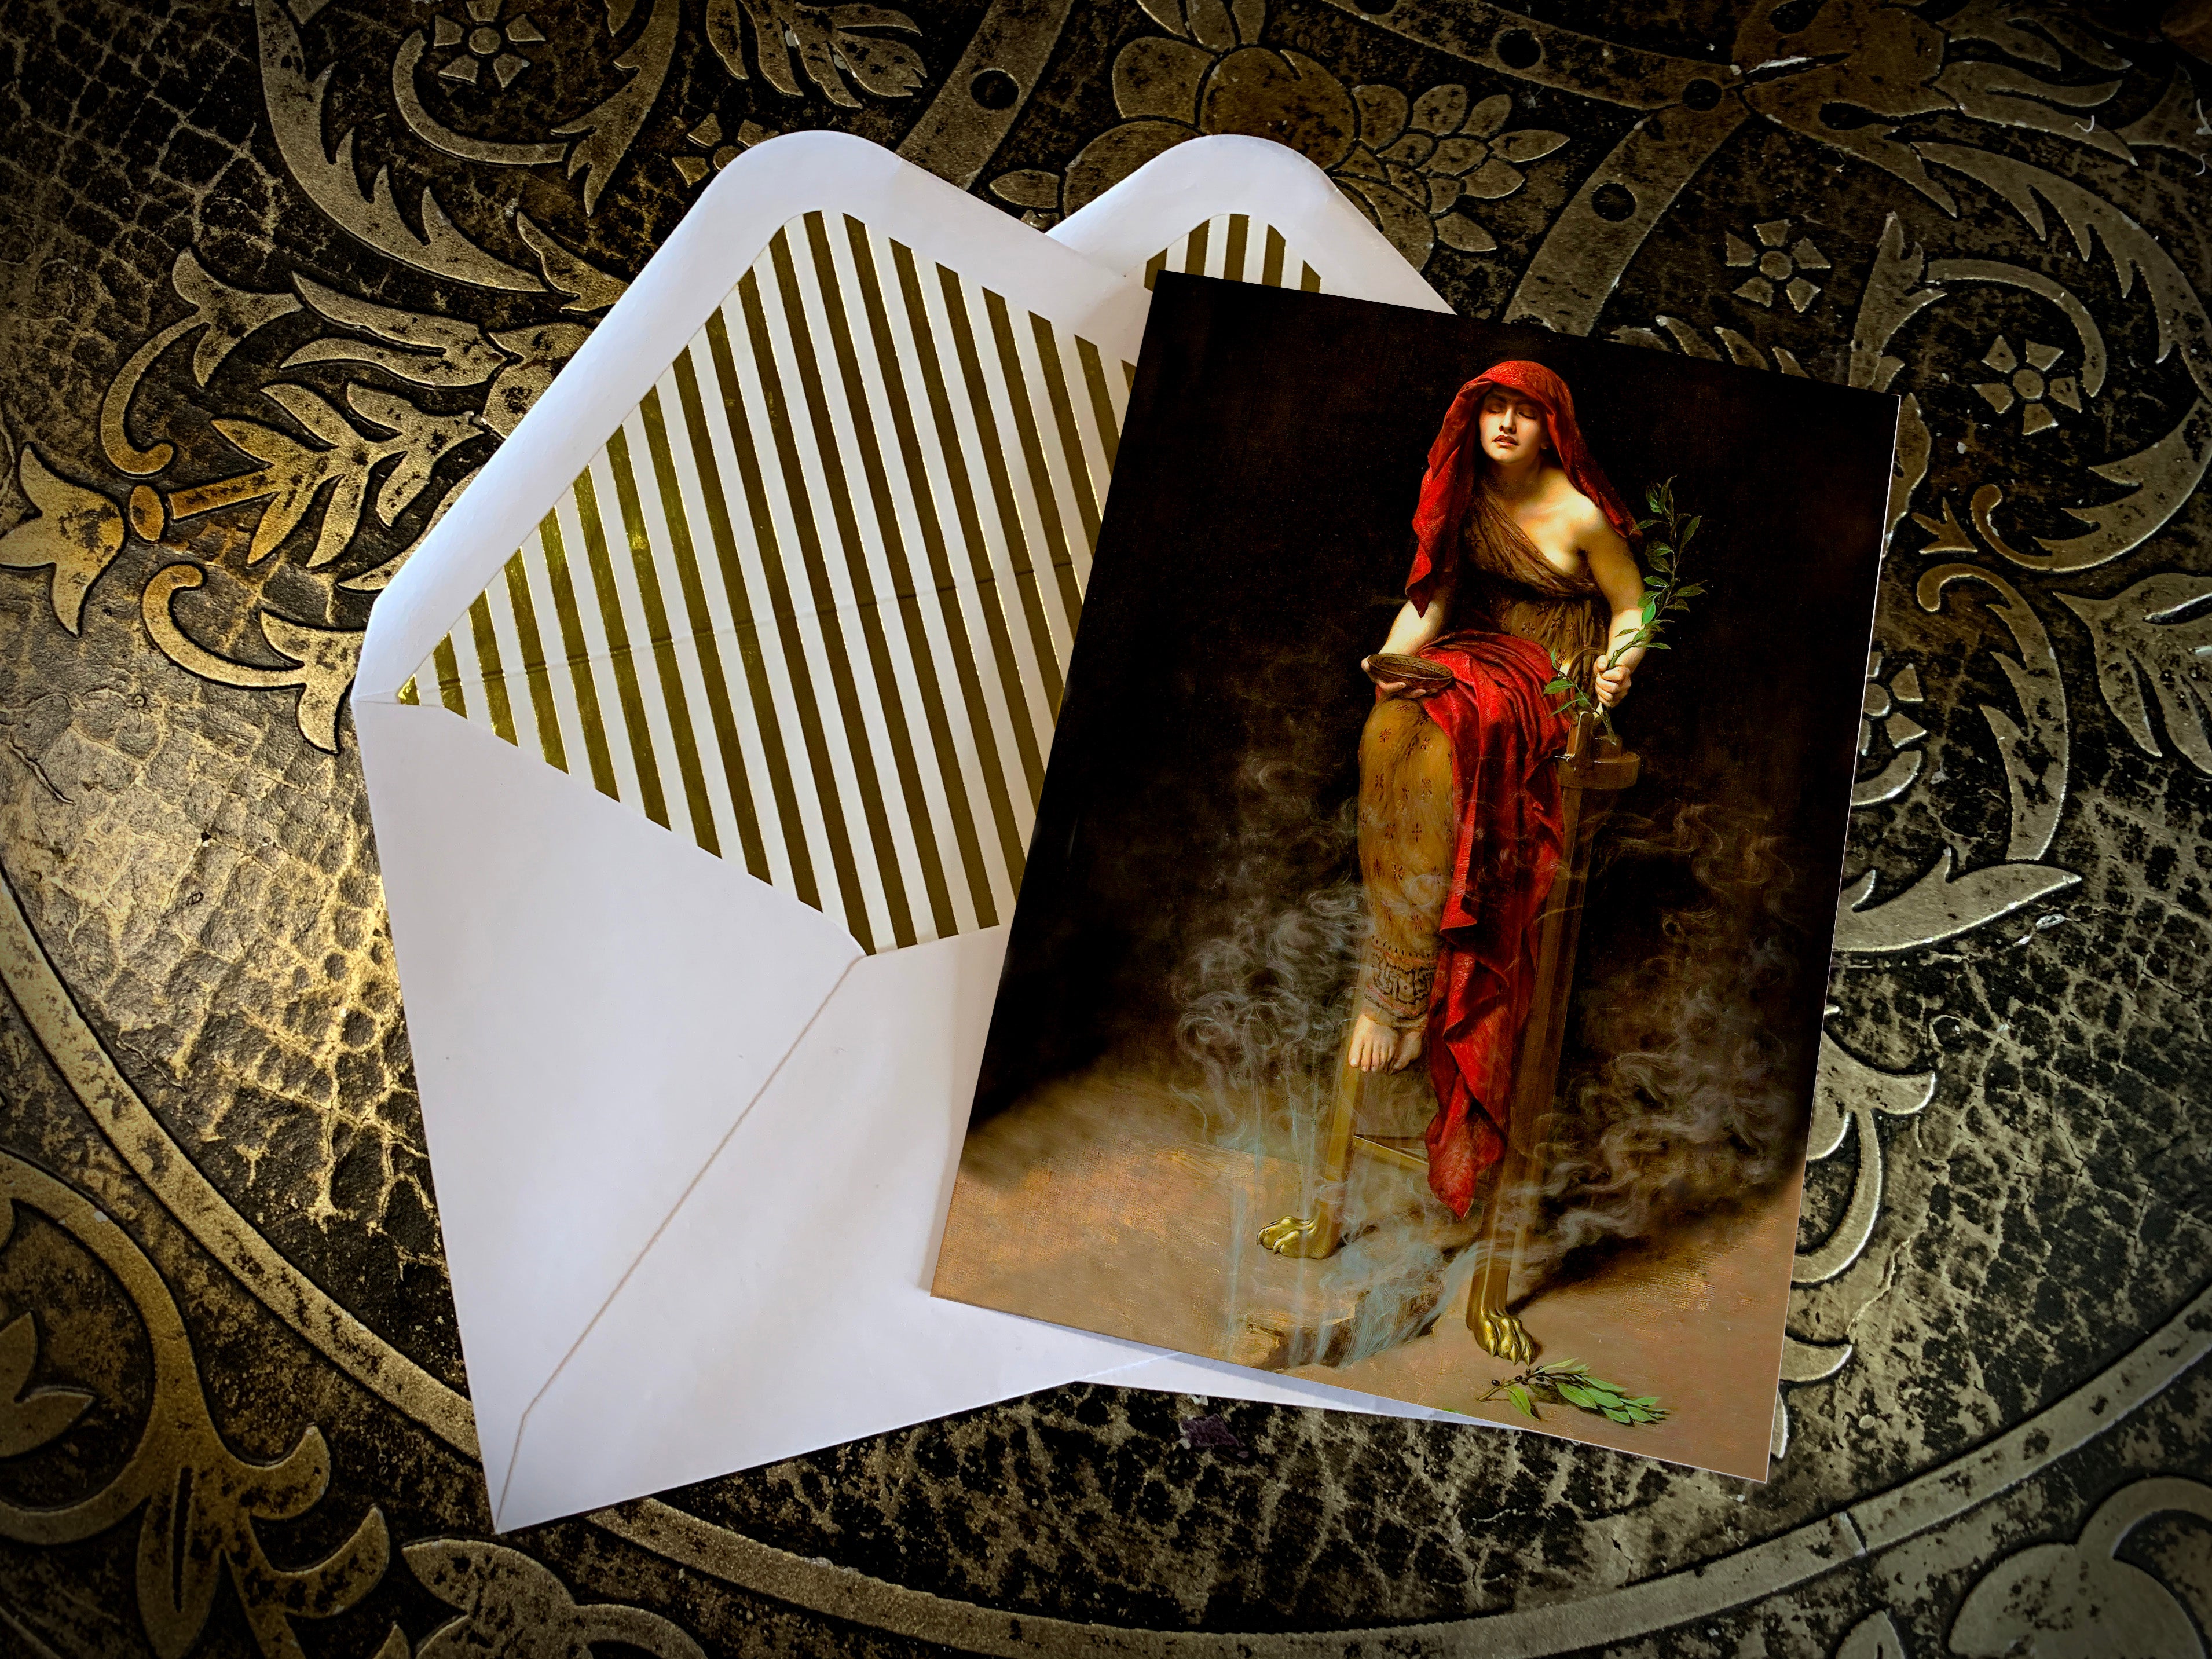 Priestess at Delphi by John Collier, Greeting Card with Elegant Striped Gold Foil Envelope, 1 Card/Envelope